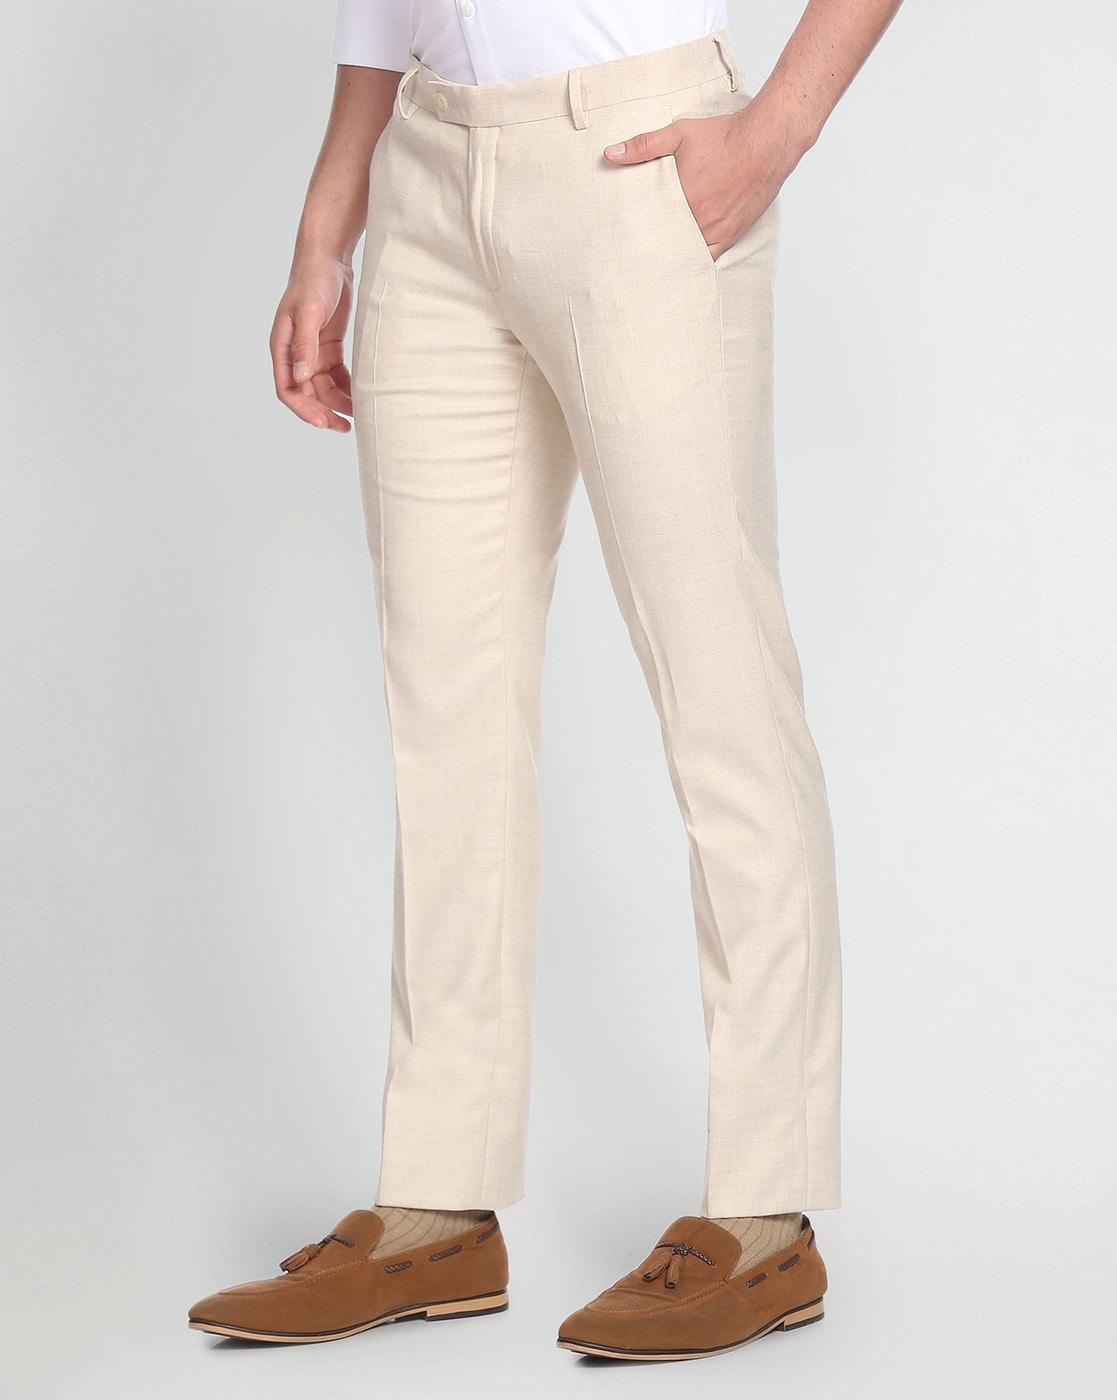 Buy Arrow Hudson Tailored Fit Formal Trousers - NNNOW.com